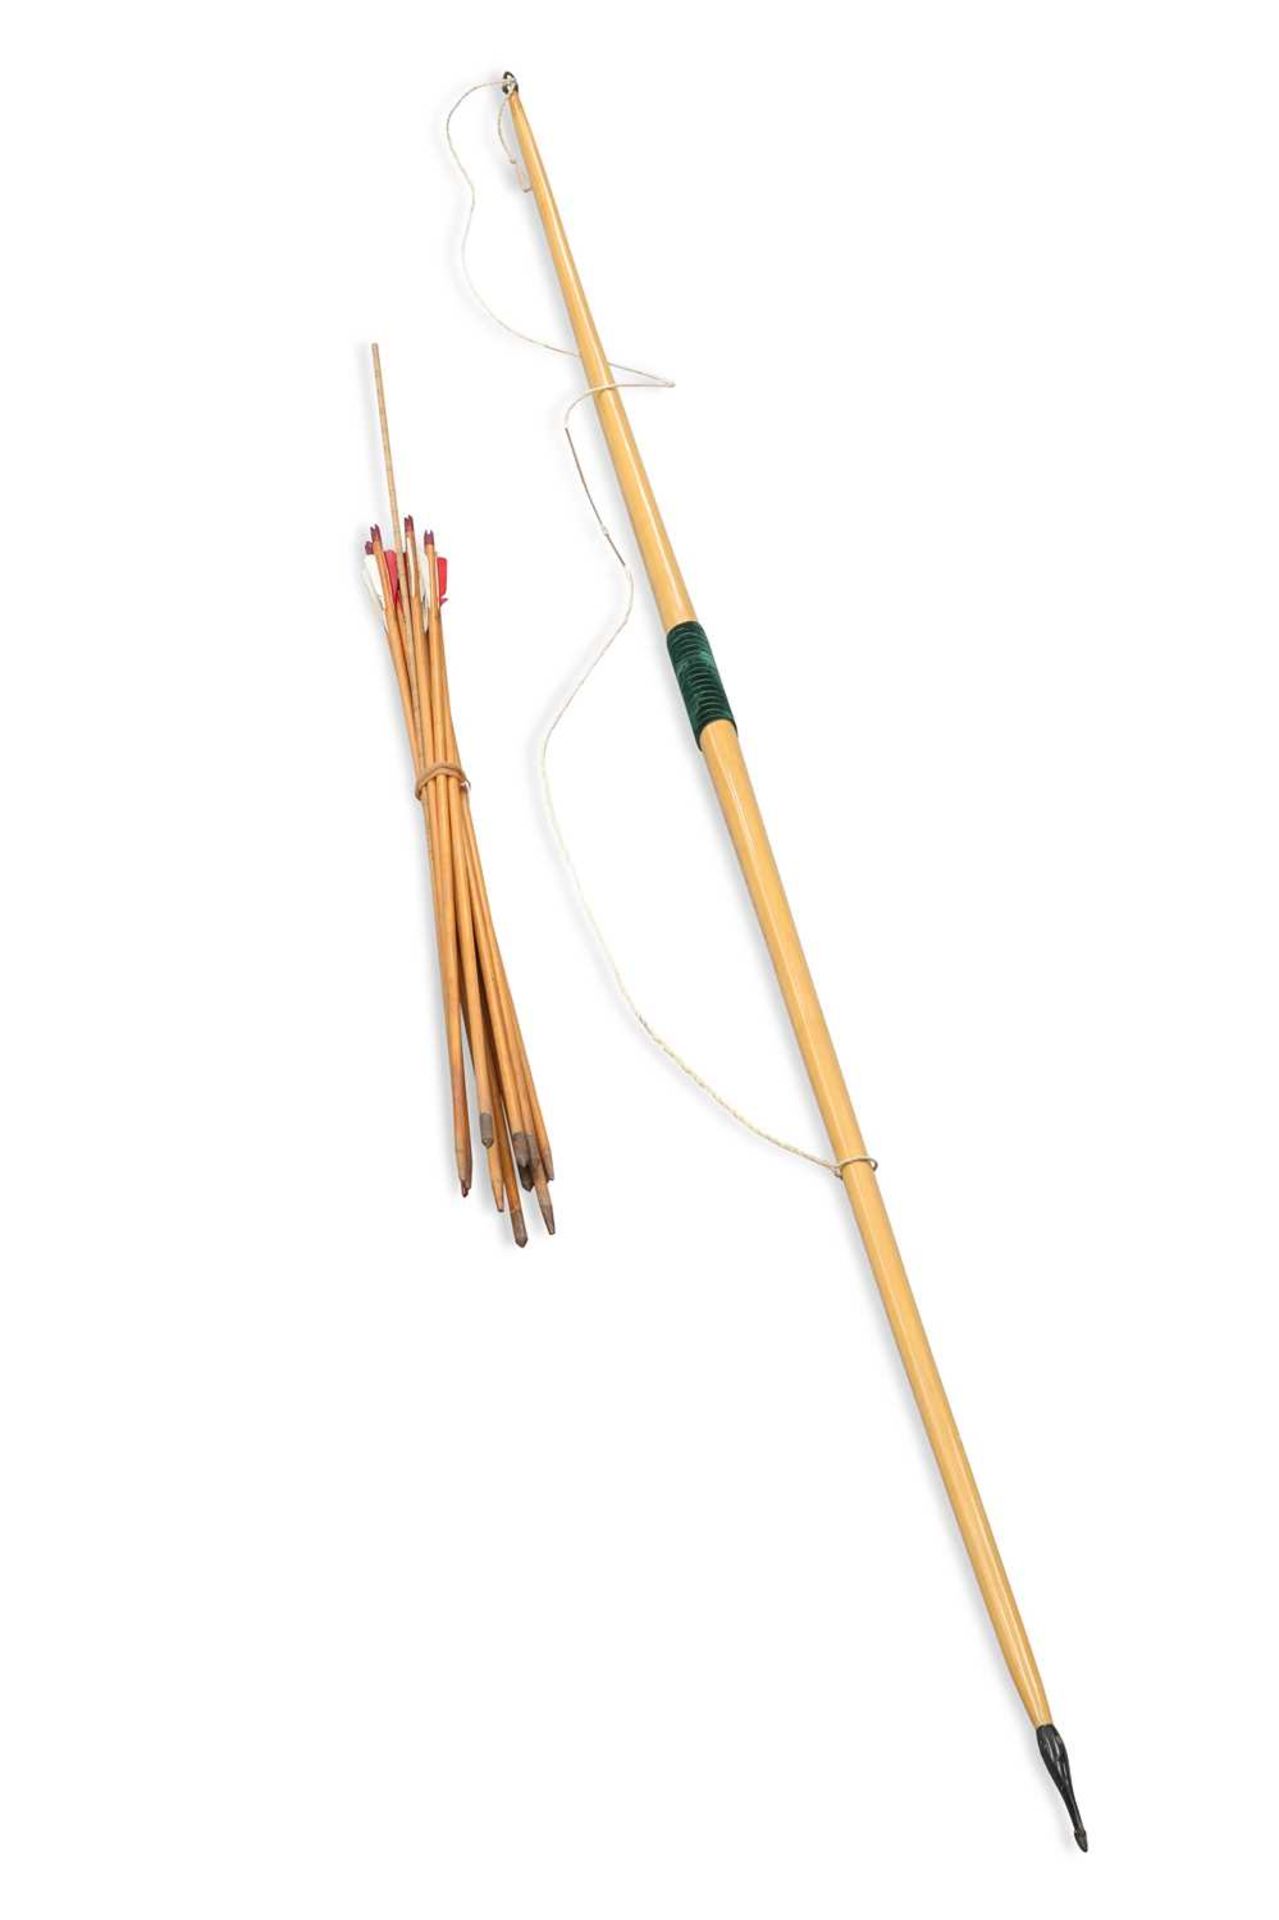 A LONGBOW AND ARROWS